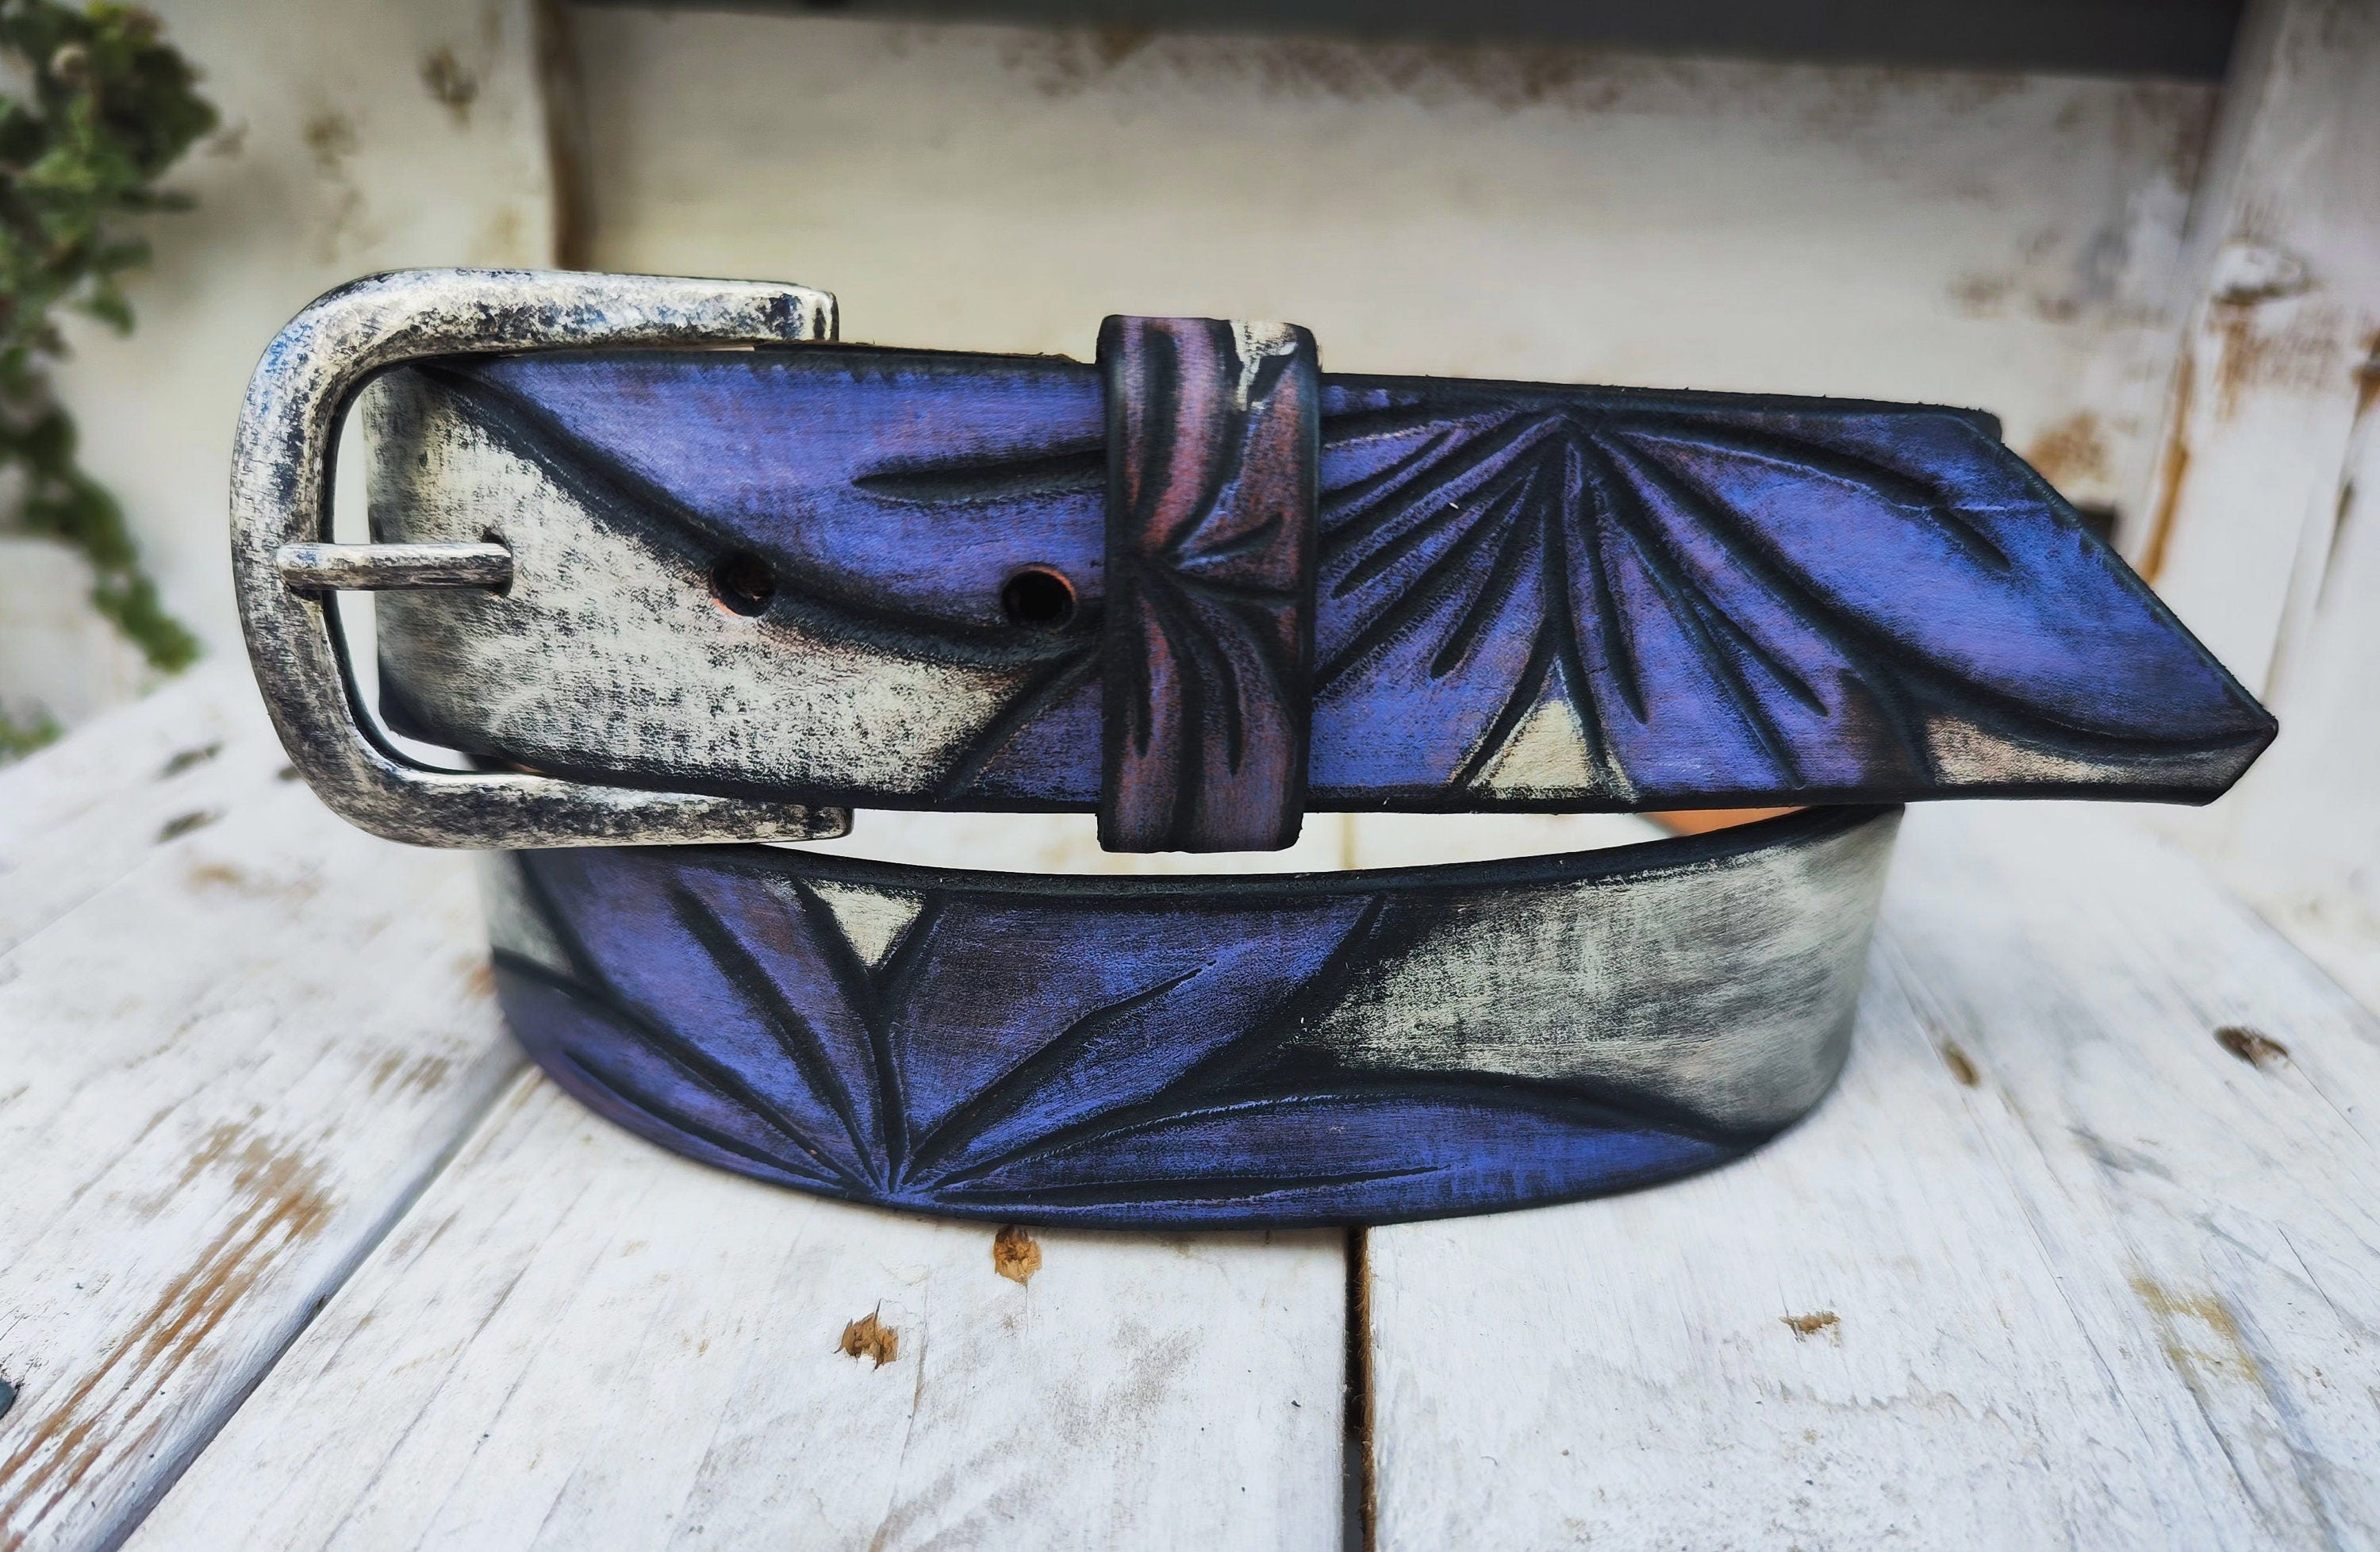 Handcrafted White Leather Belt with Engraved Purple Flower Design and Blackwash Finish